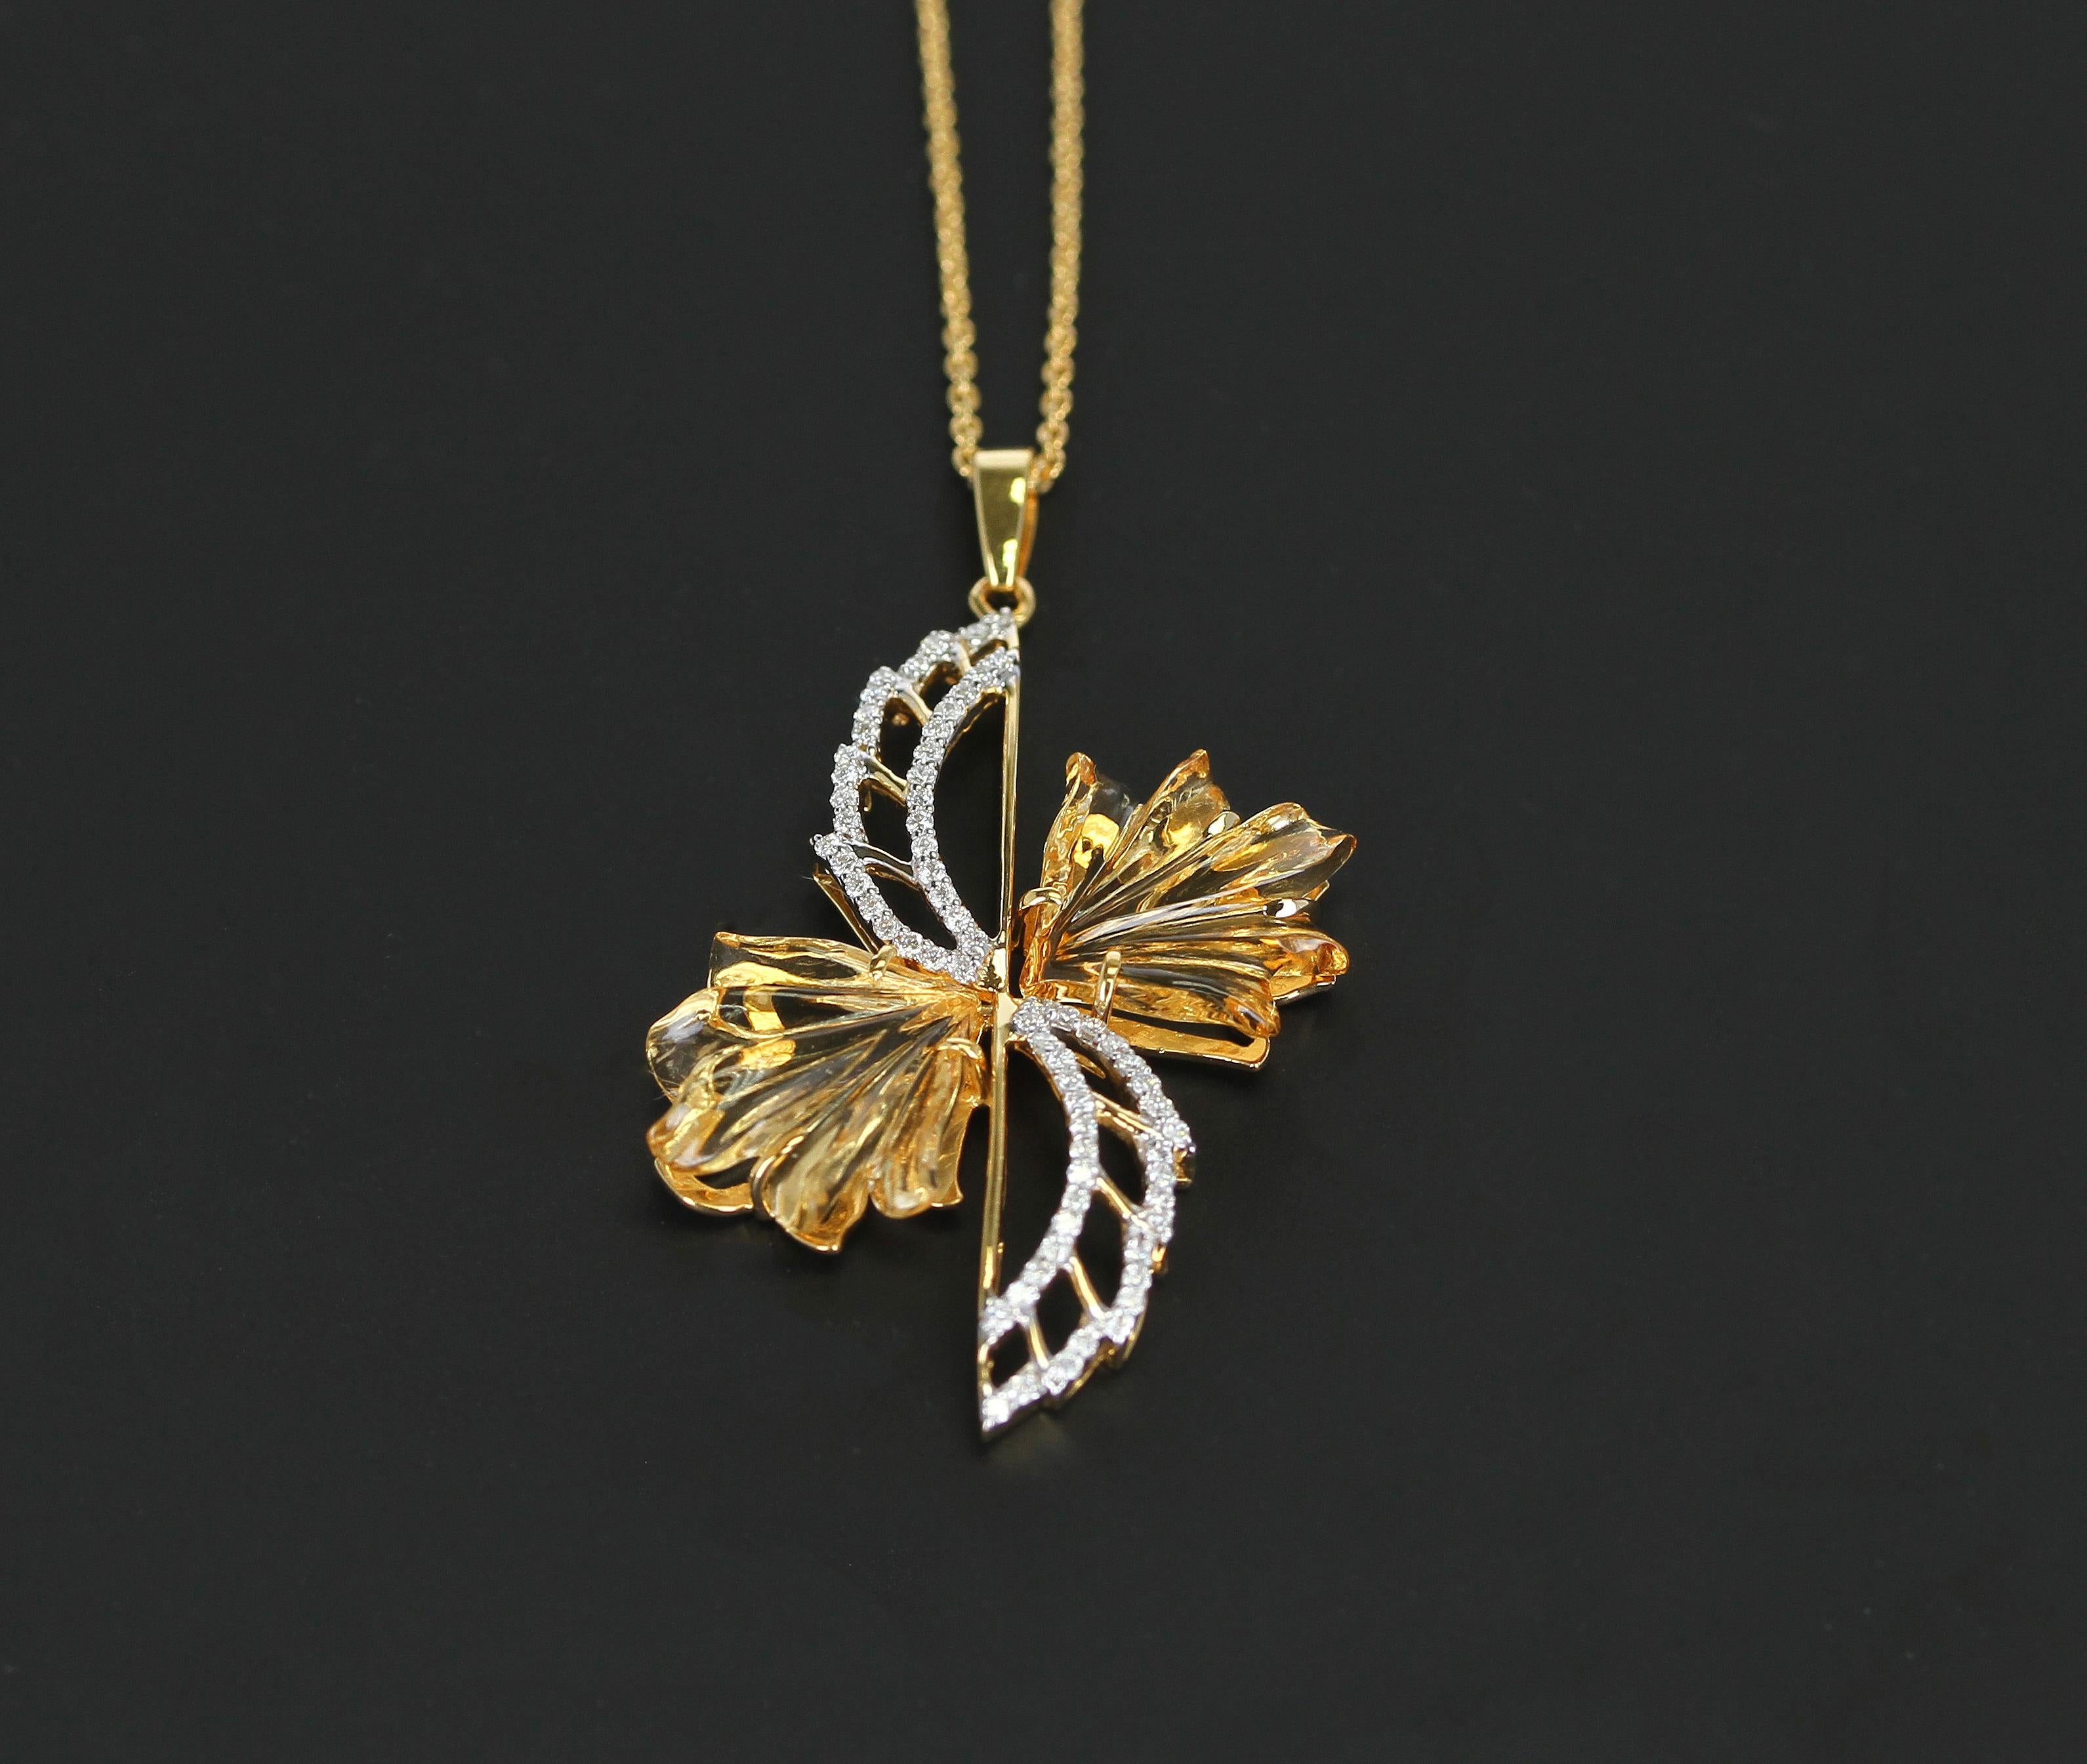 A beautiful and large pendant with carved Citrine and Diamonds as a wing design, with a chain. 14K Gold, Diamond Weight: 0.33 carats, Citrine Weight: 7.99 cts, Pendant Length: 1 & ¾”, Chain: 18